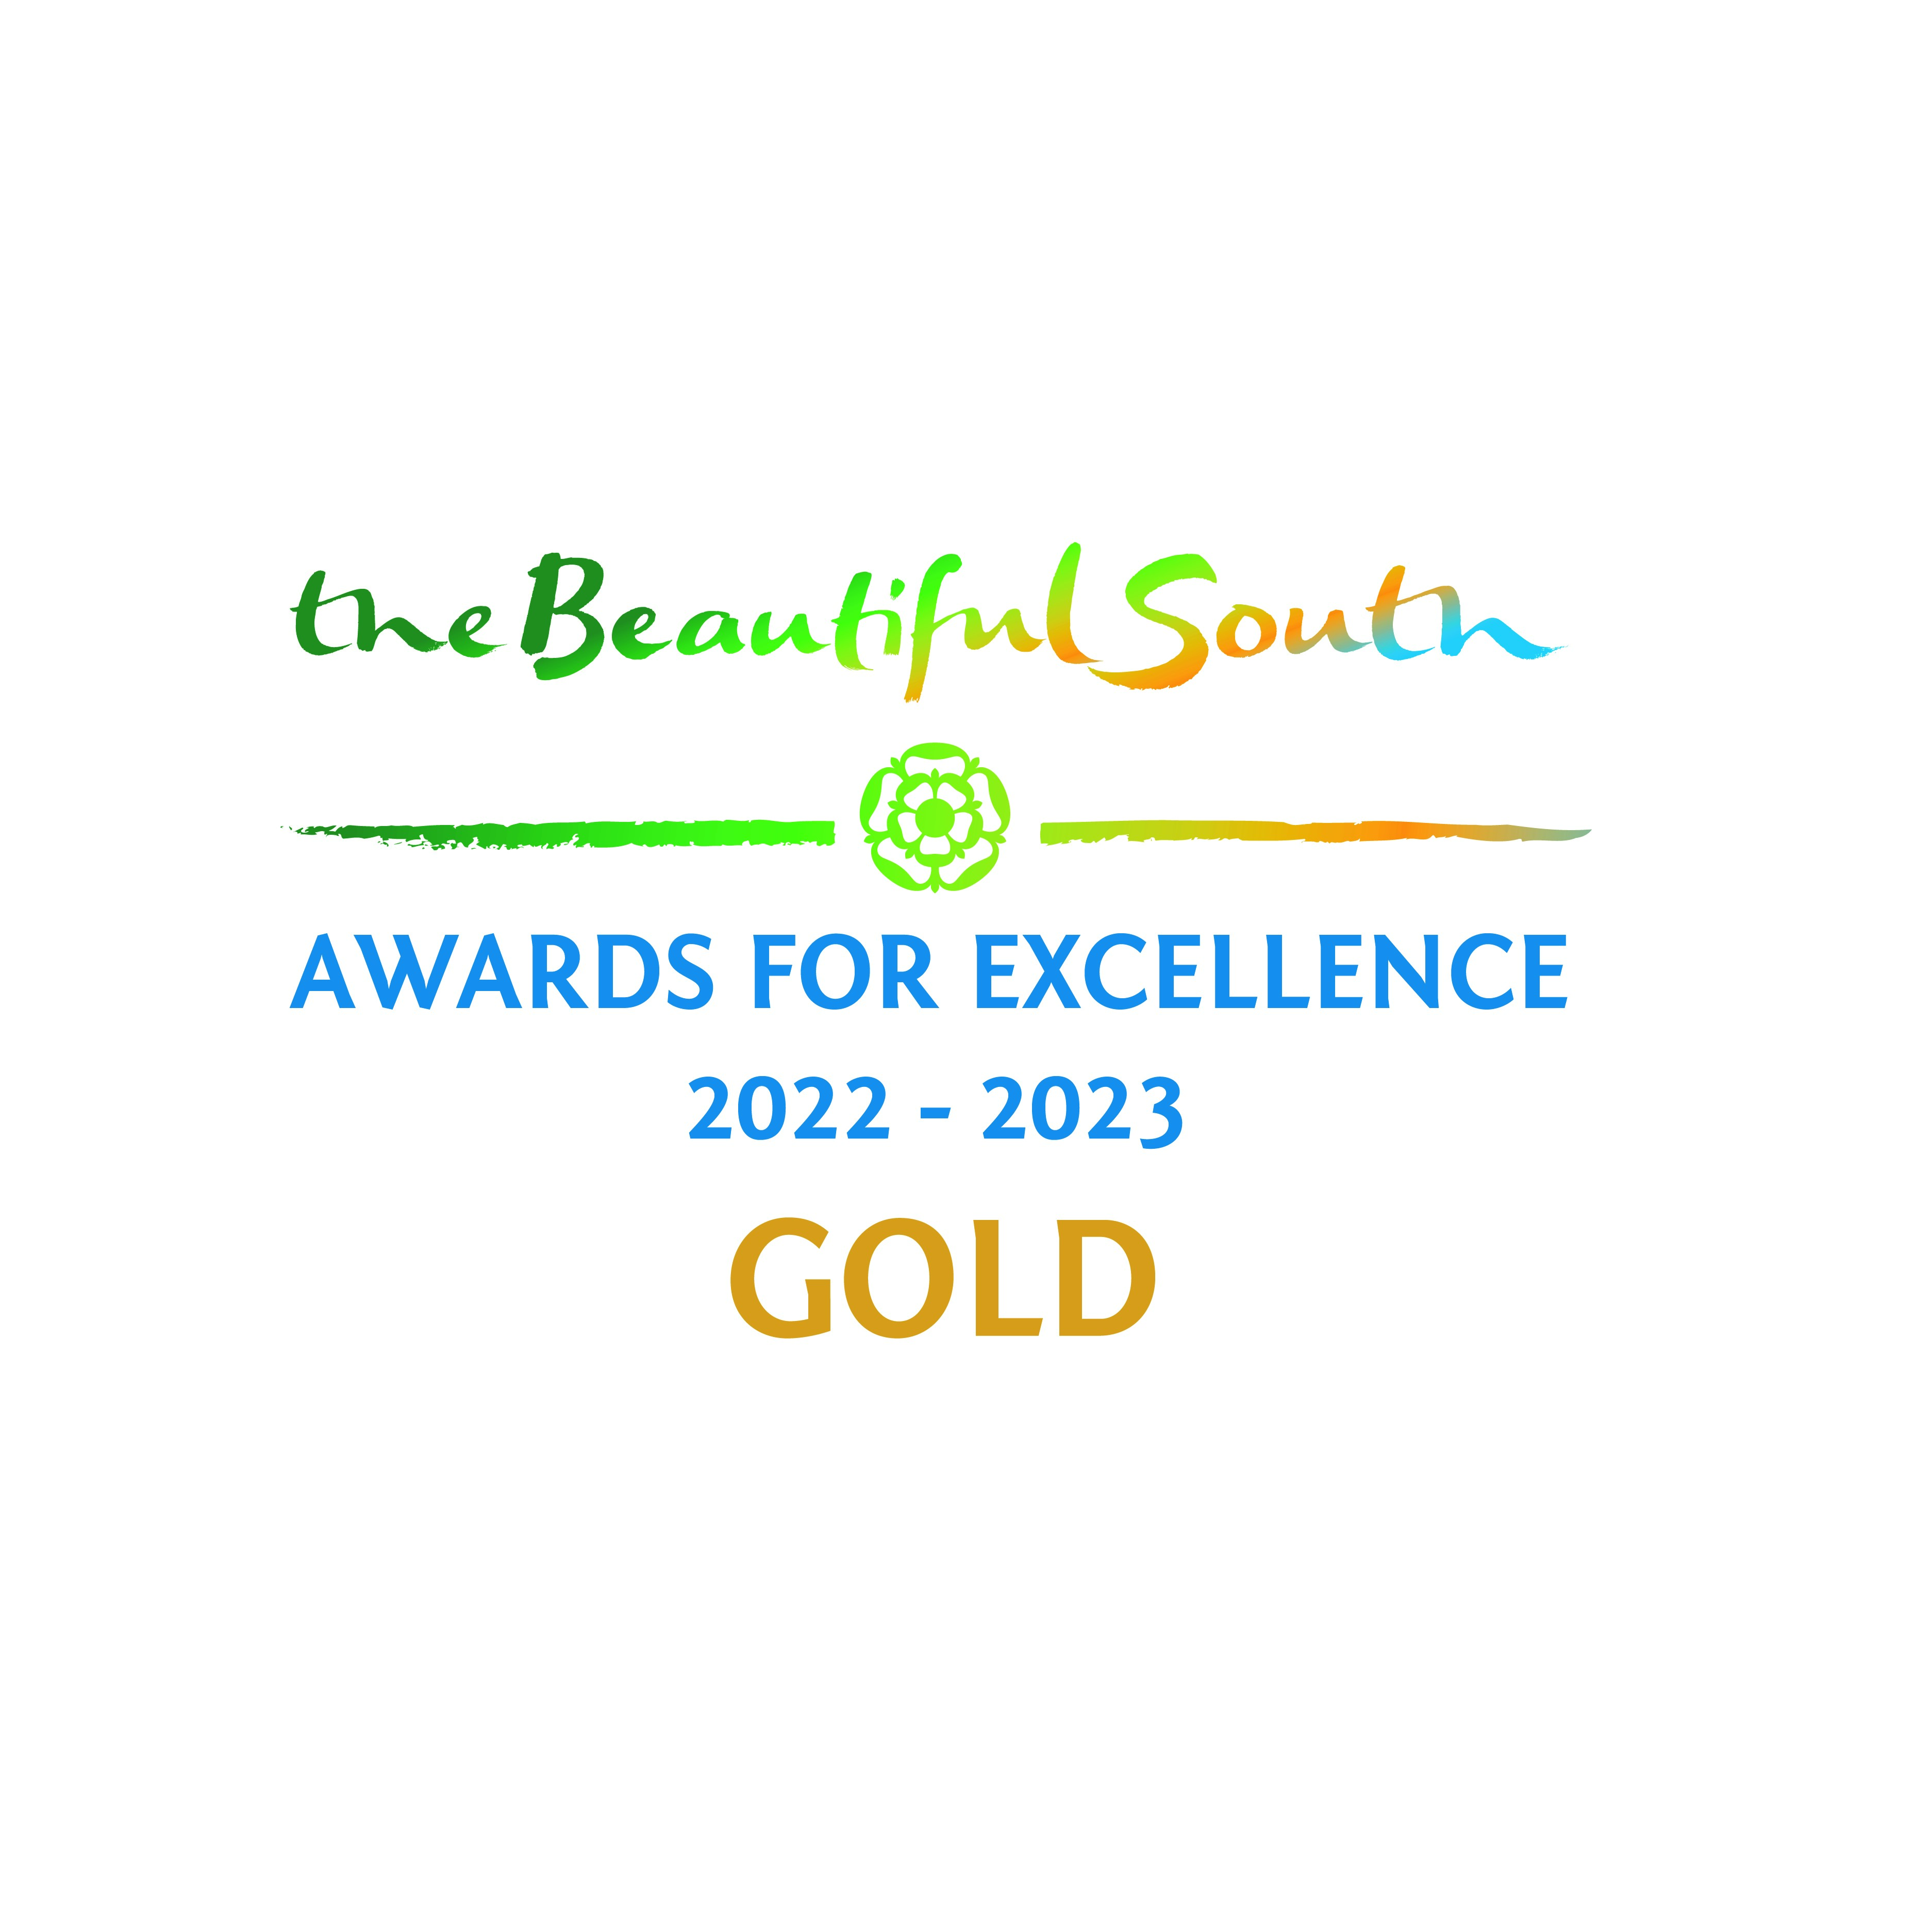 Beautiful South Awards for Excellence - Gold - 2022/23